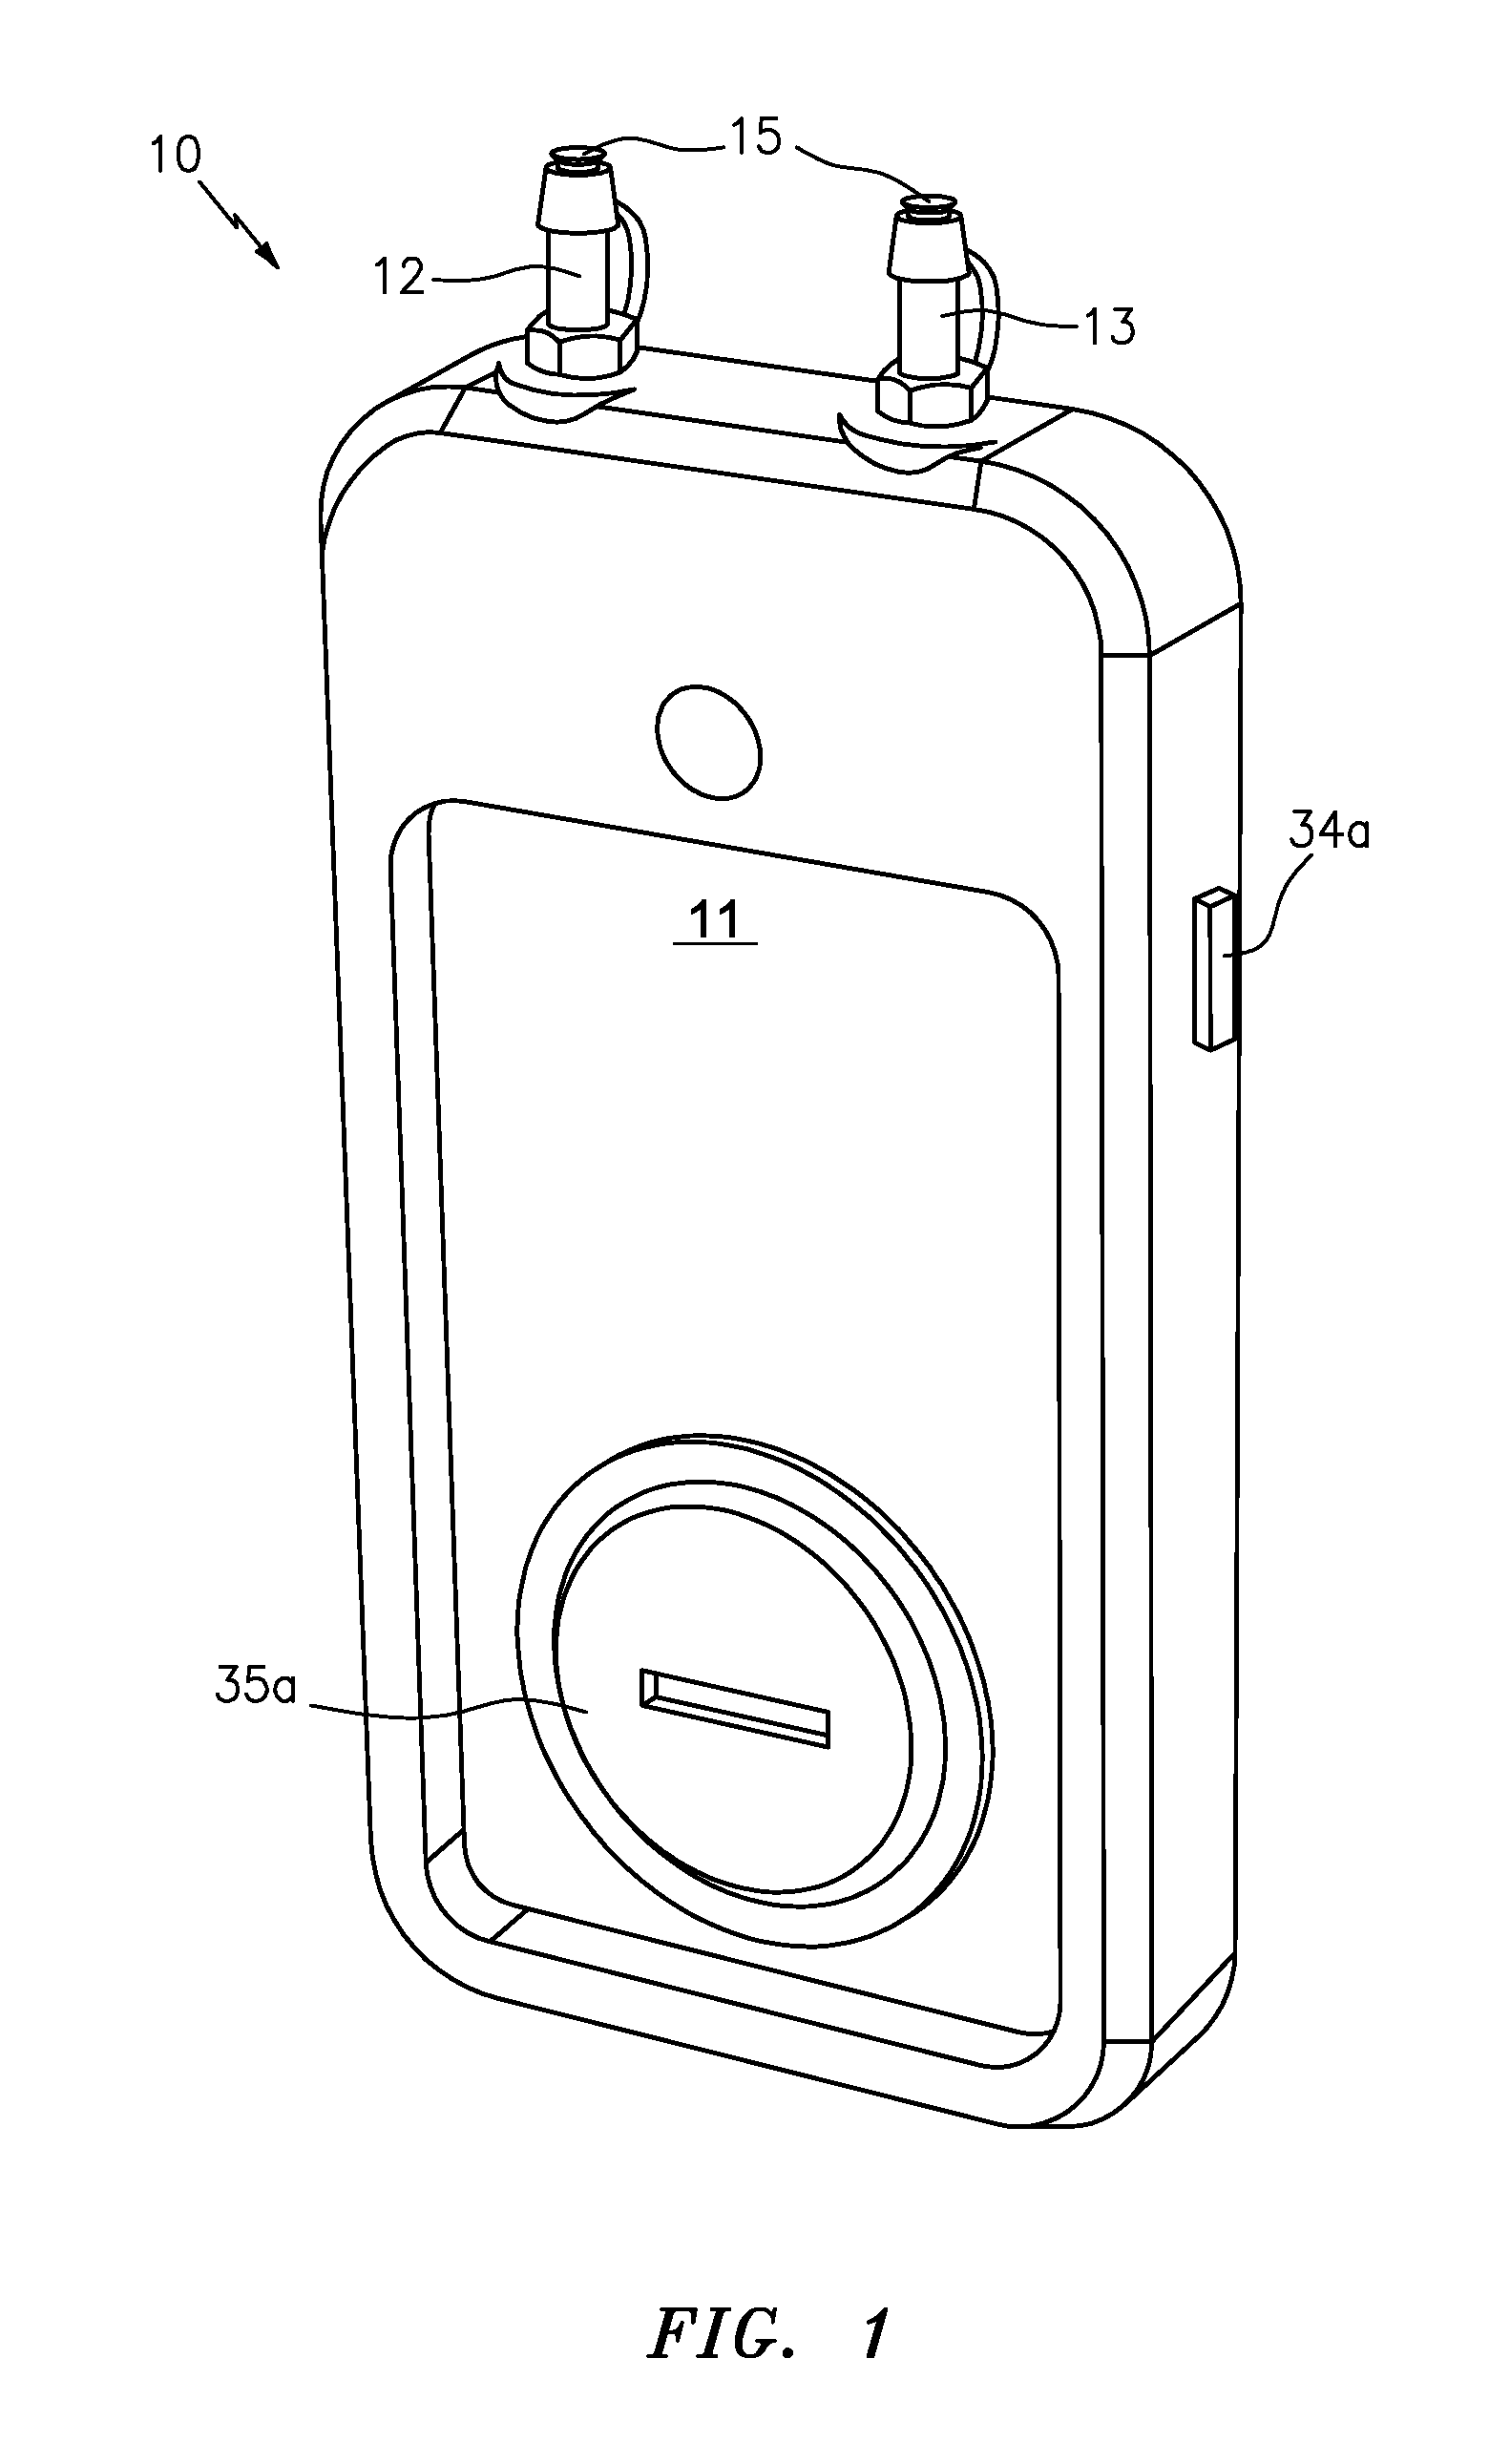 Smartphone operated air pressure meter and system